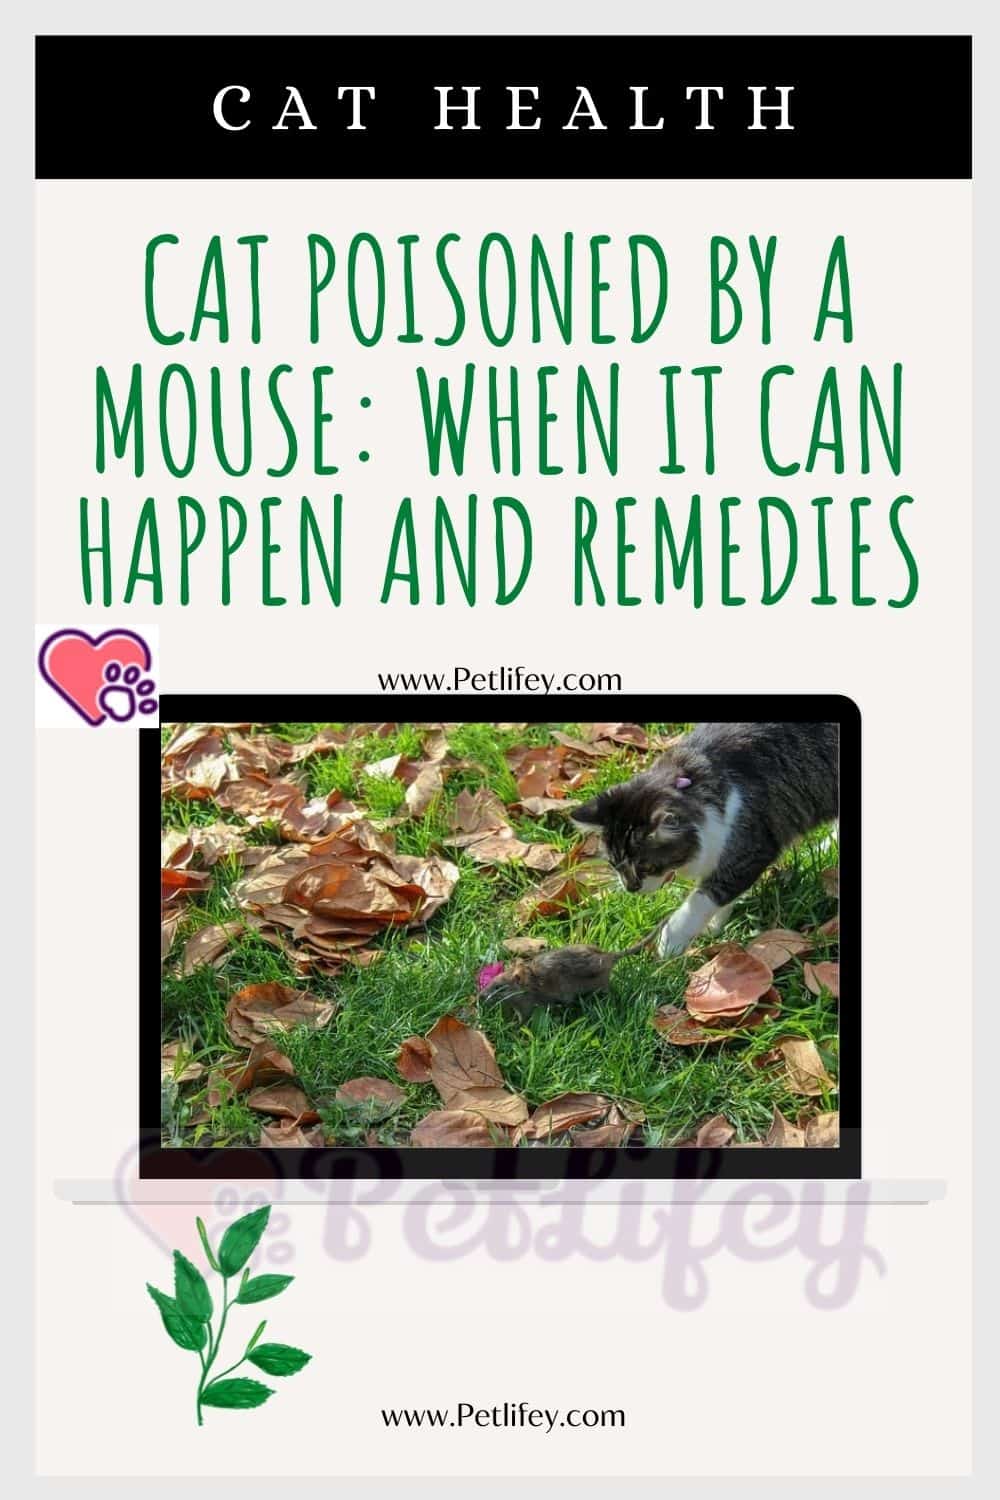 Cat poisoned by a mouse